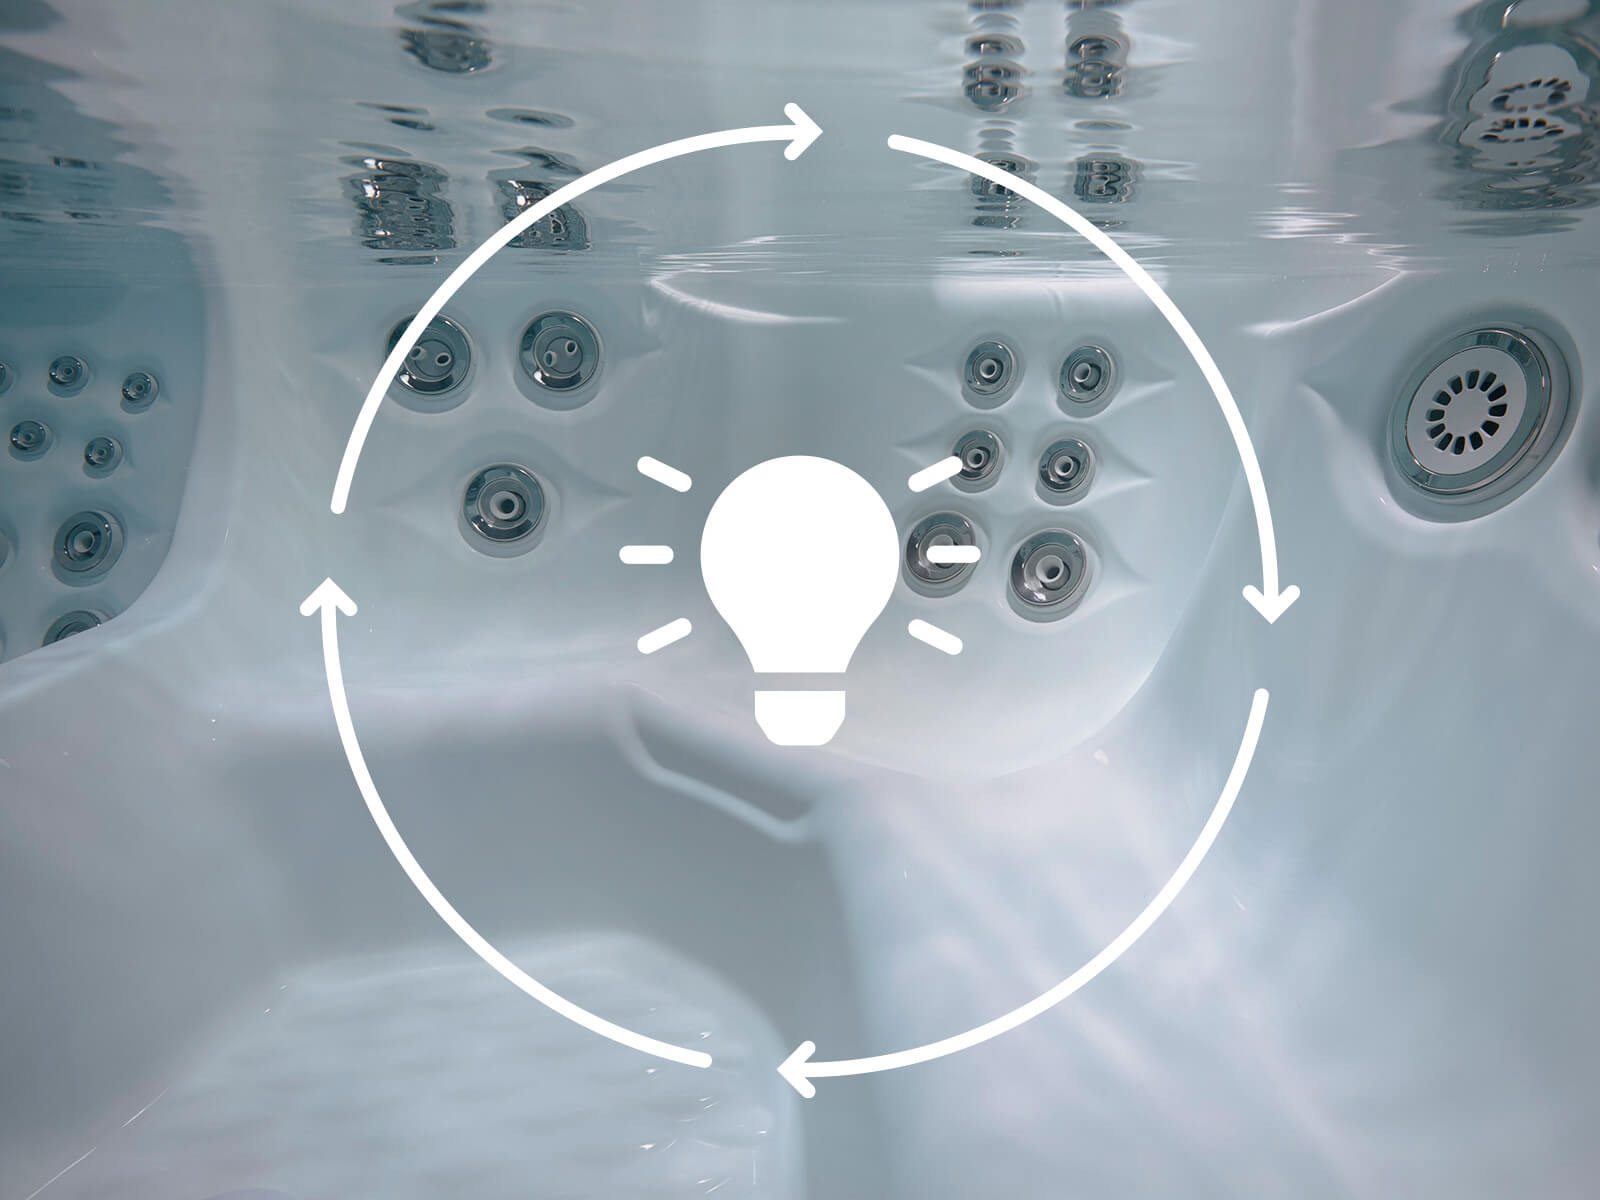 A lighbulb icon within a graphic of a rotating circle, overlaid on an image of a hot tub to signify the low energy cost of this component.